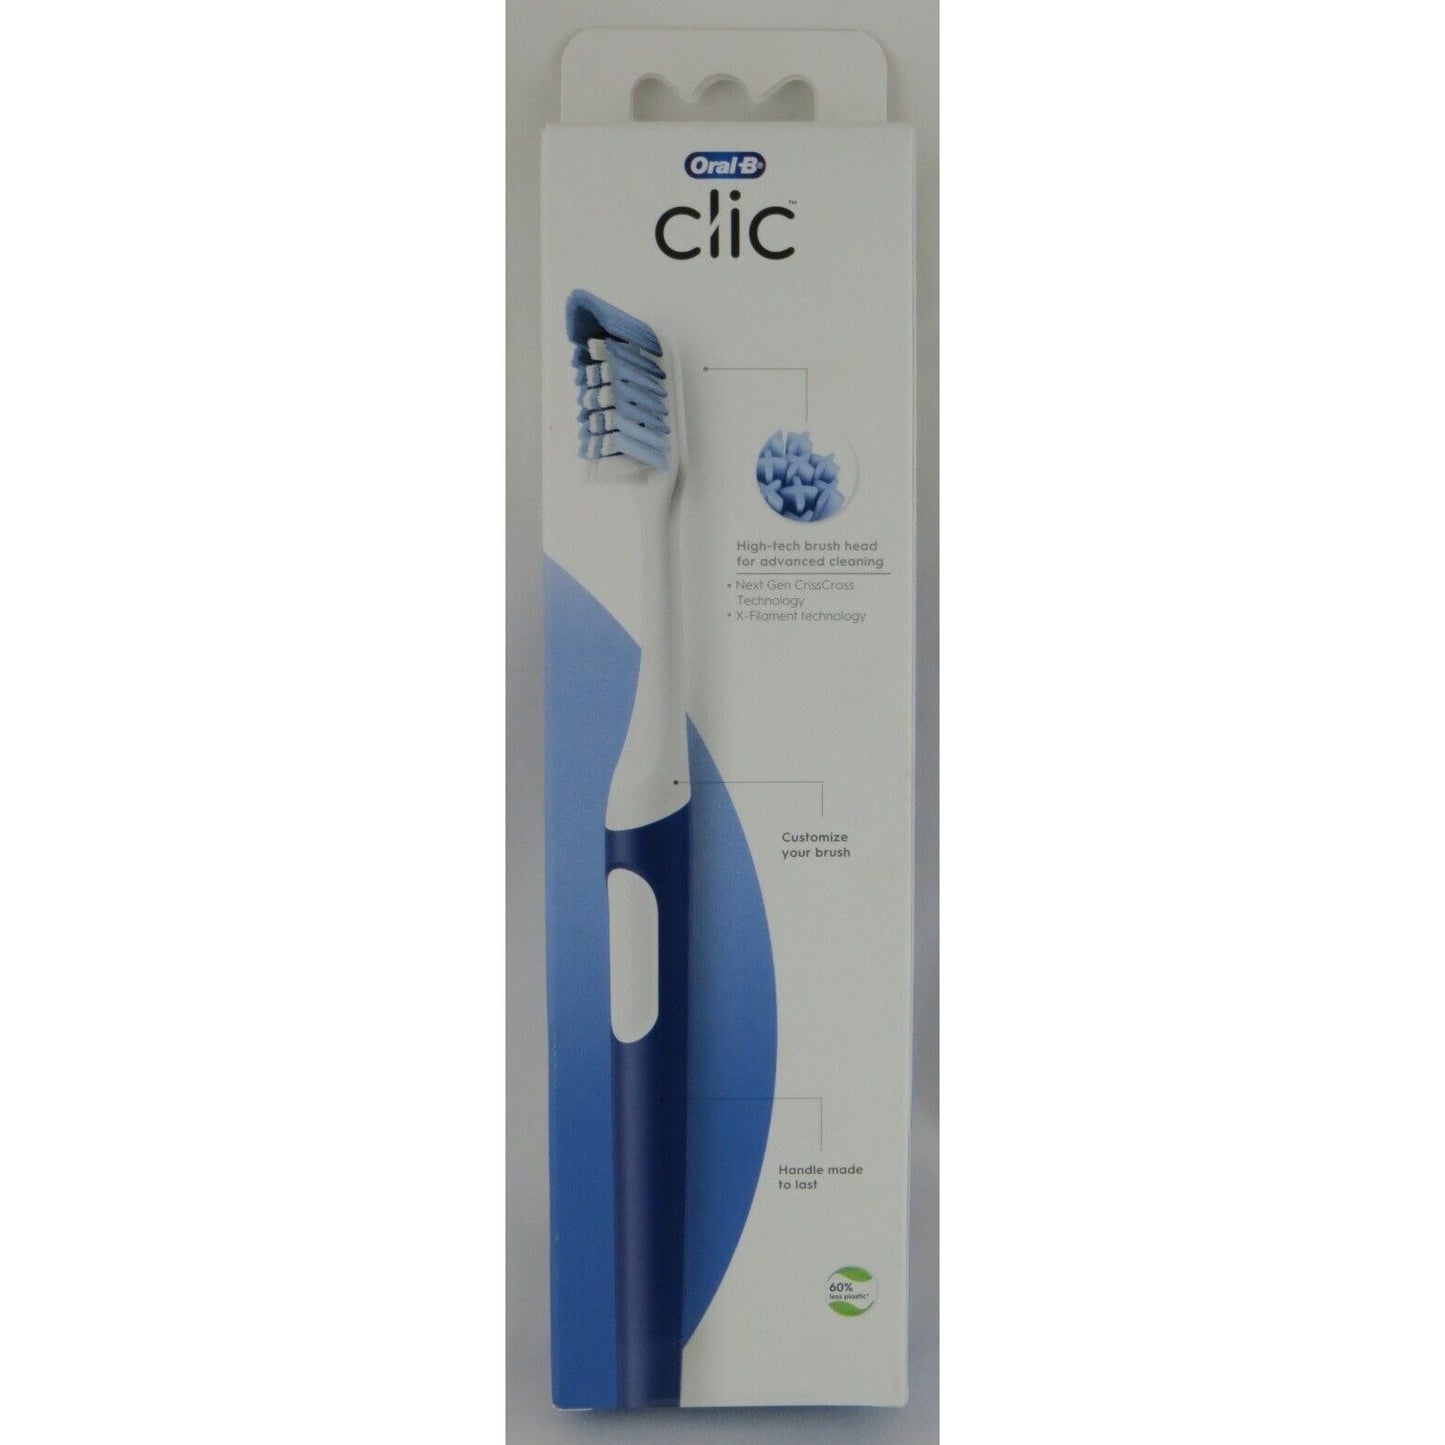 Oral-B Clic Toothbrush Handle with Replaceable Brush Head White